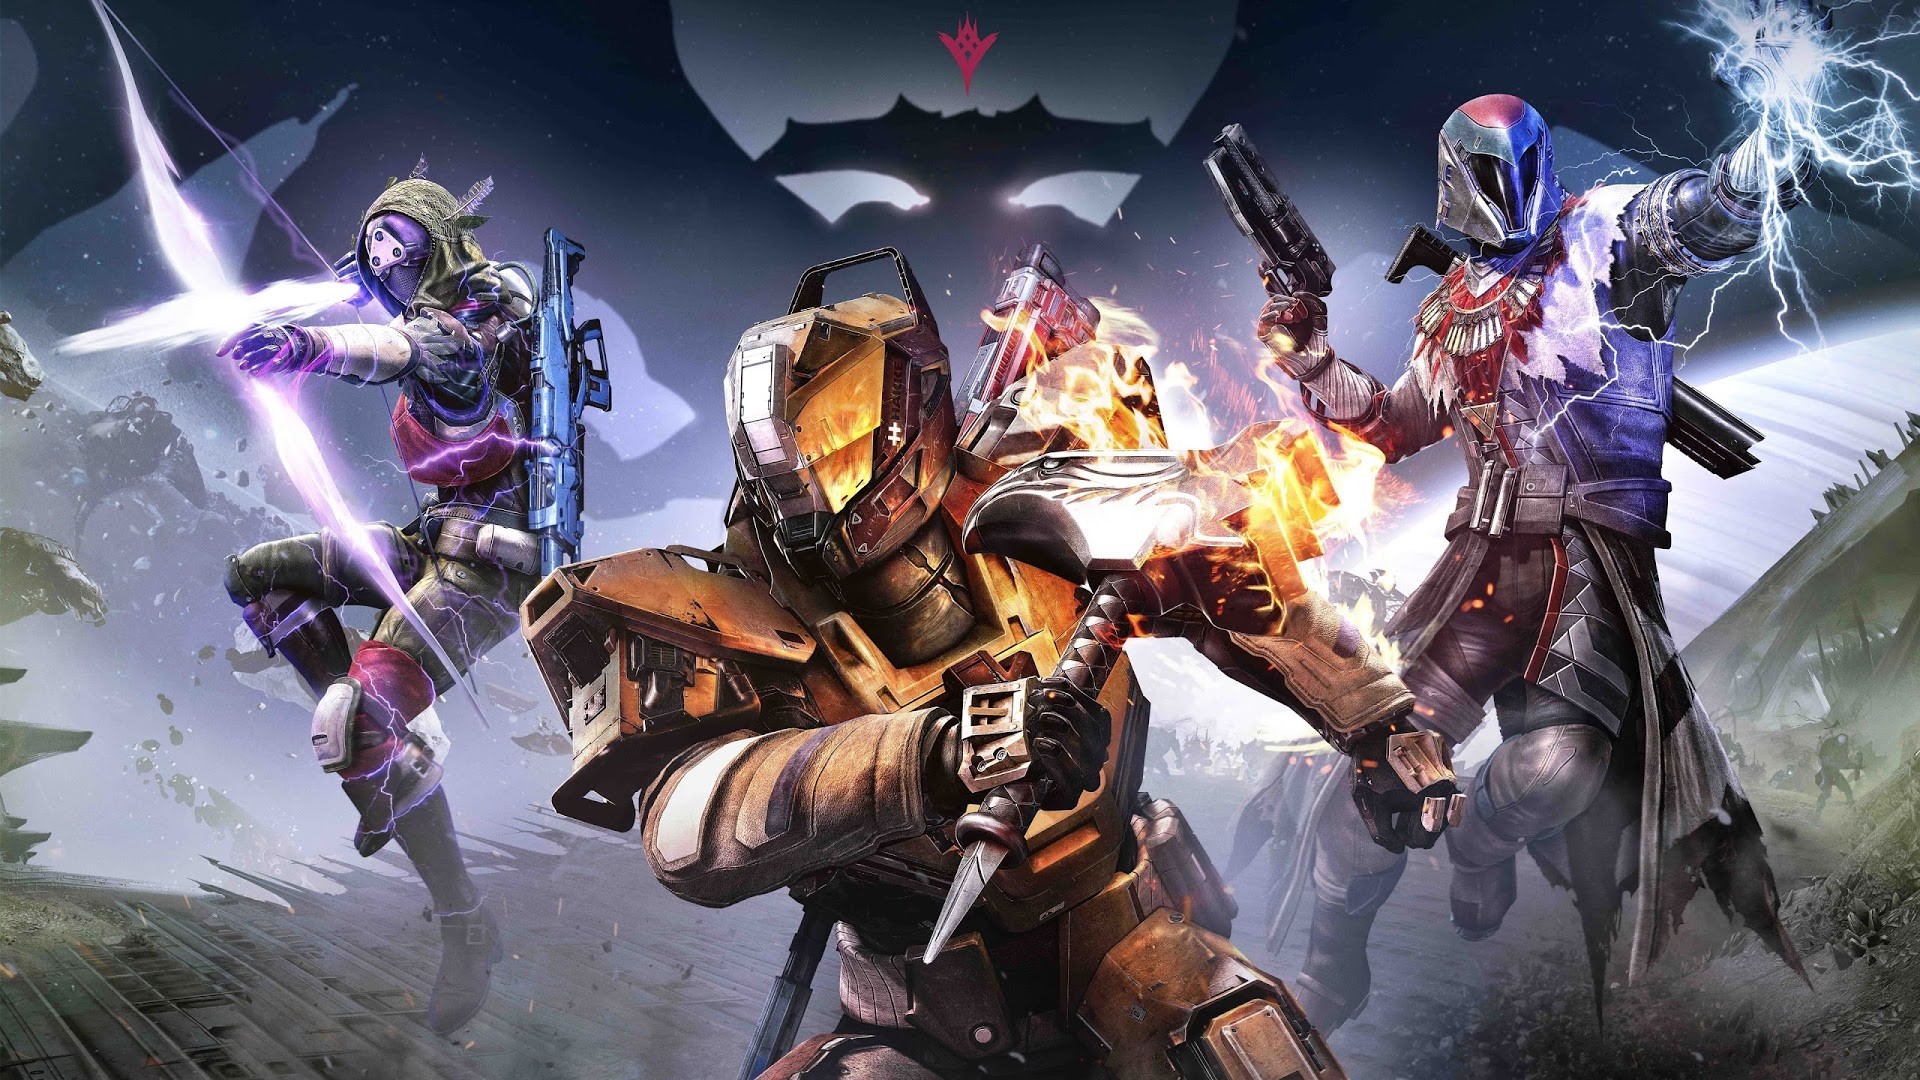 1920x1080 1st 4K wallpaper is with Destiny: The Taken King Â· 3 hot wallpapers from  super games are listed below in 4K, HD and wide sizes for apply in your  tablets and ...